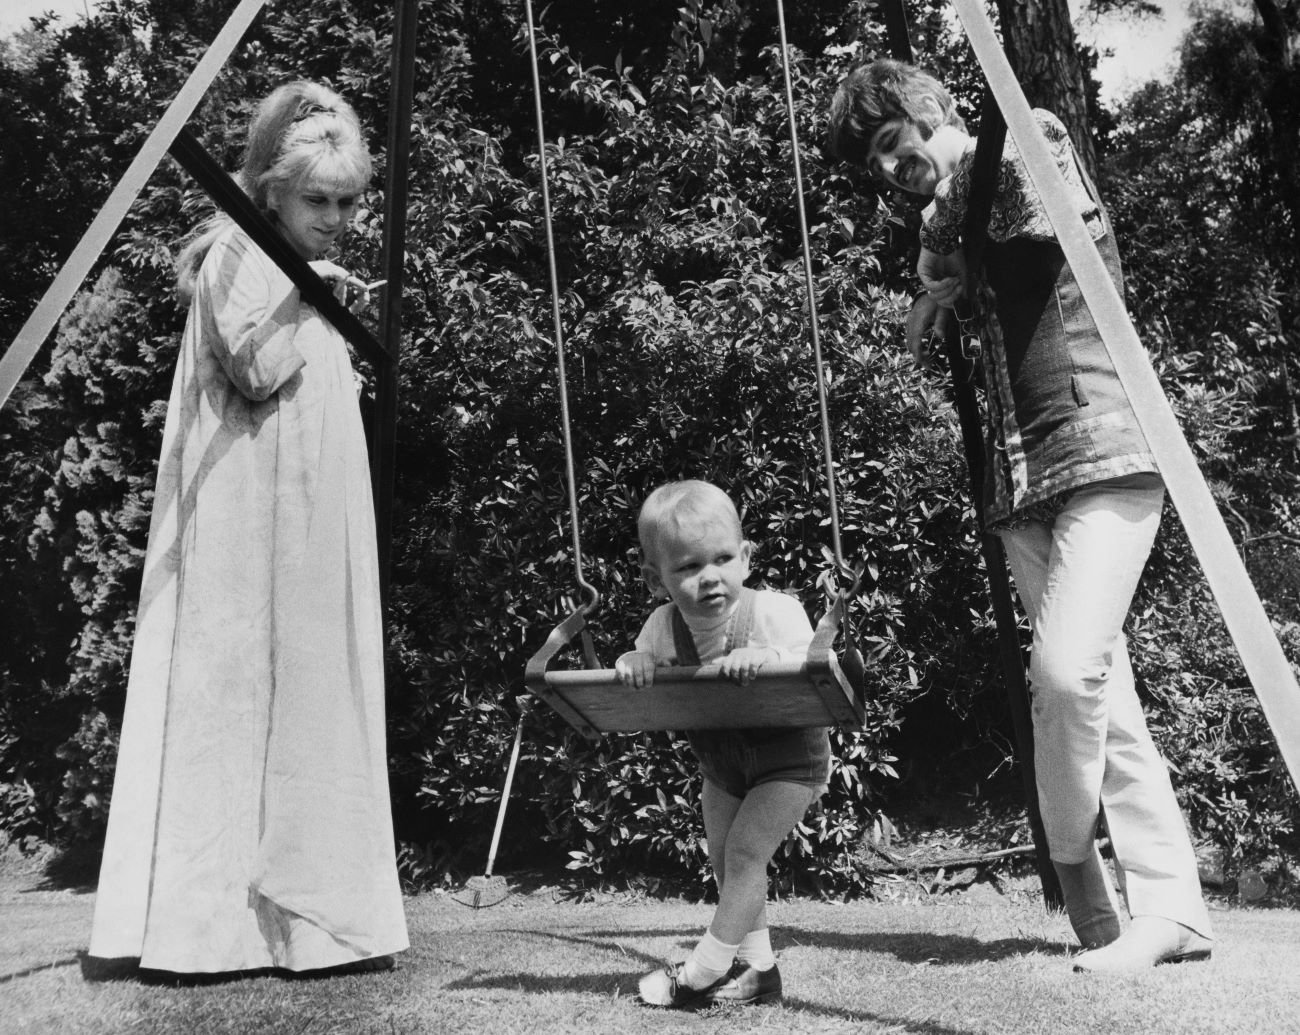 A black and white picture of Maureen Starkey and Ringo Starr looking down at their son Zak on a swing.